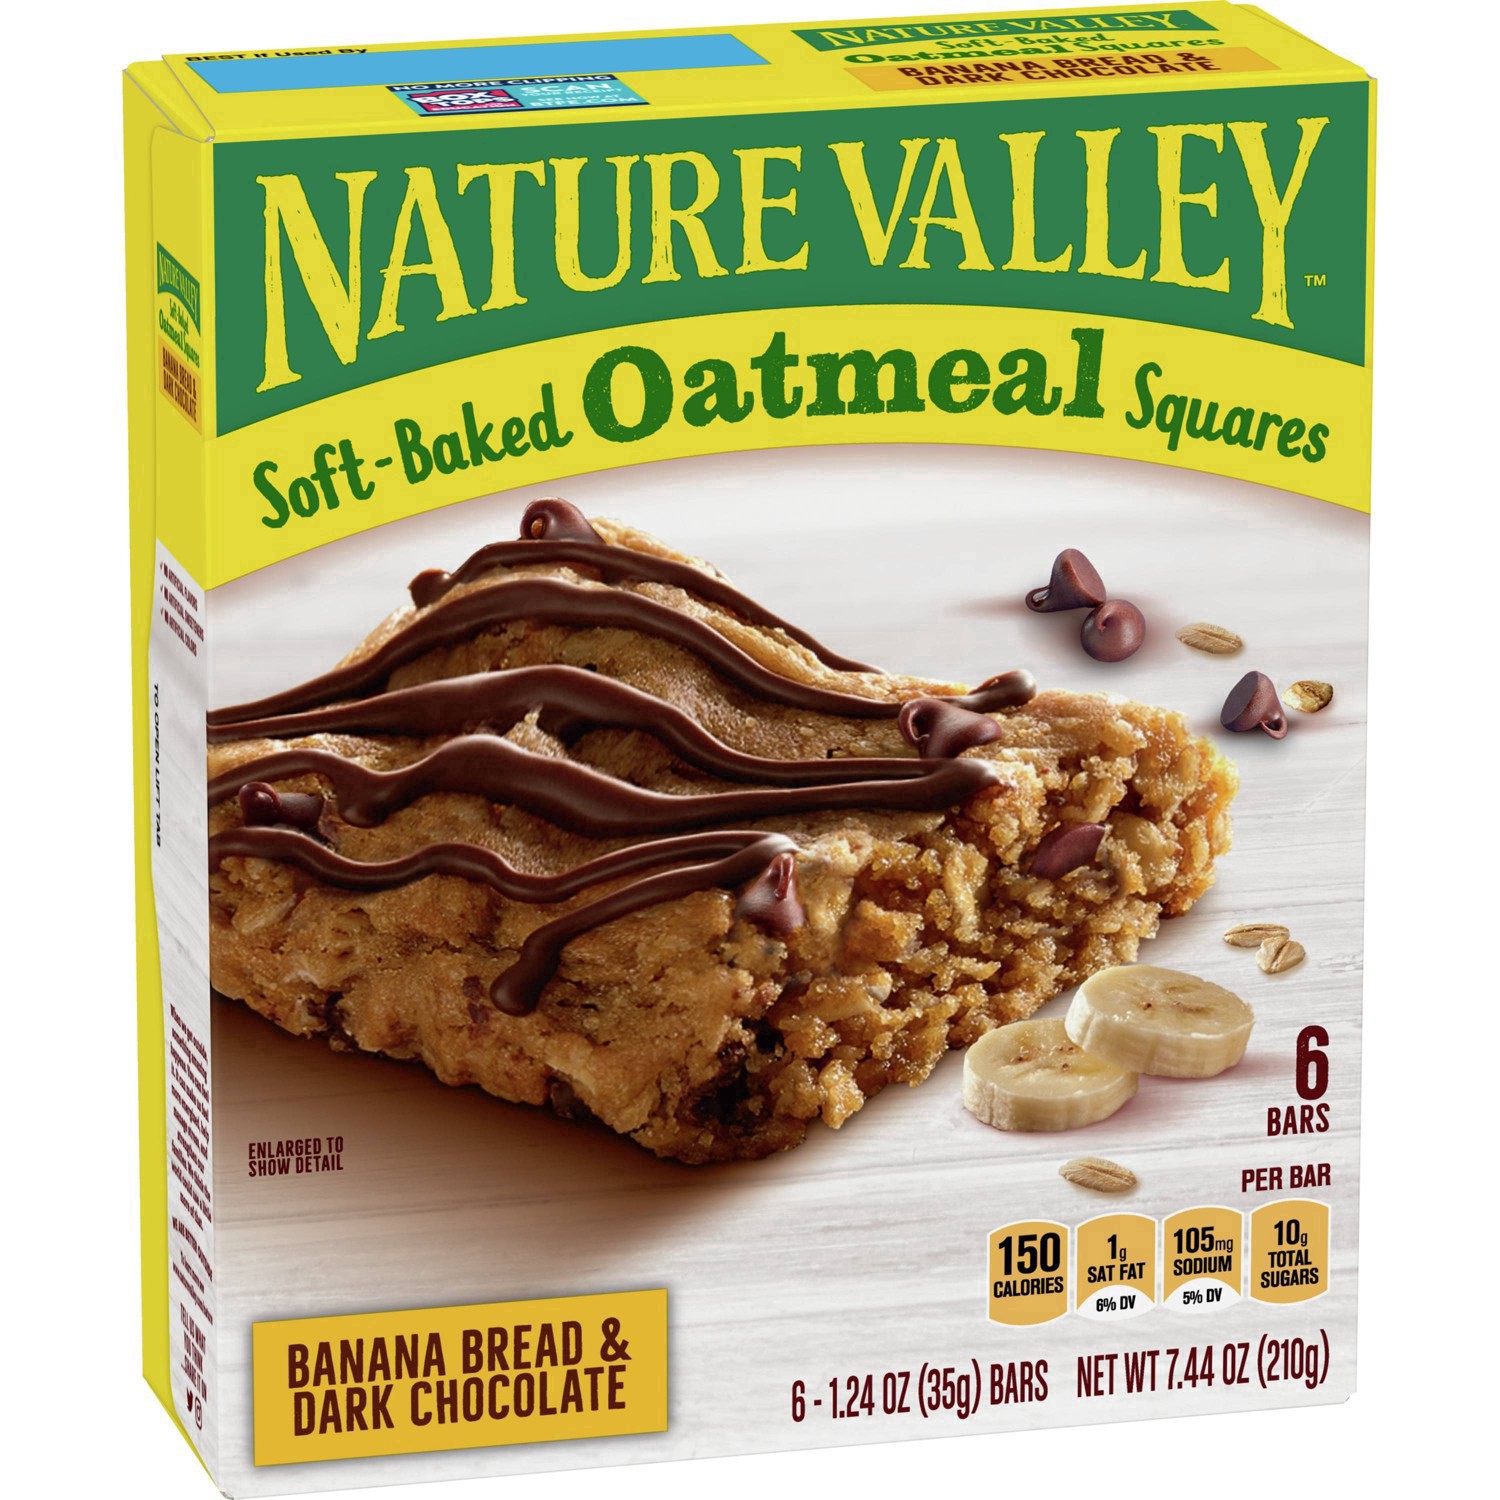 slide 5 of 101, Nature Valley Soft-Baked Oatmeal Squares, Banana Bread & Dark Chocolate, 6 ct, 6 ct